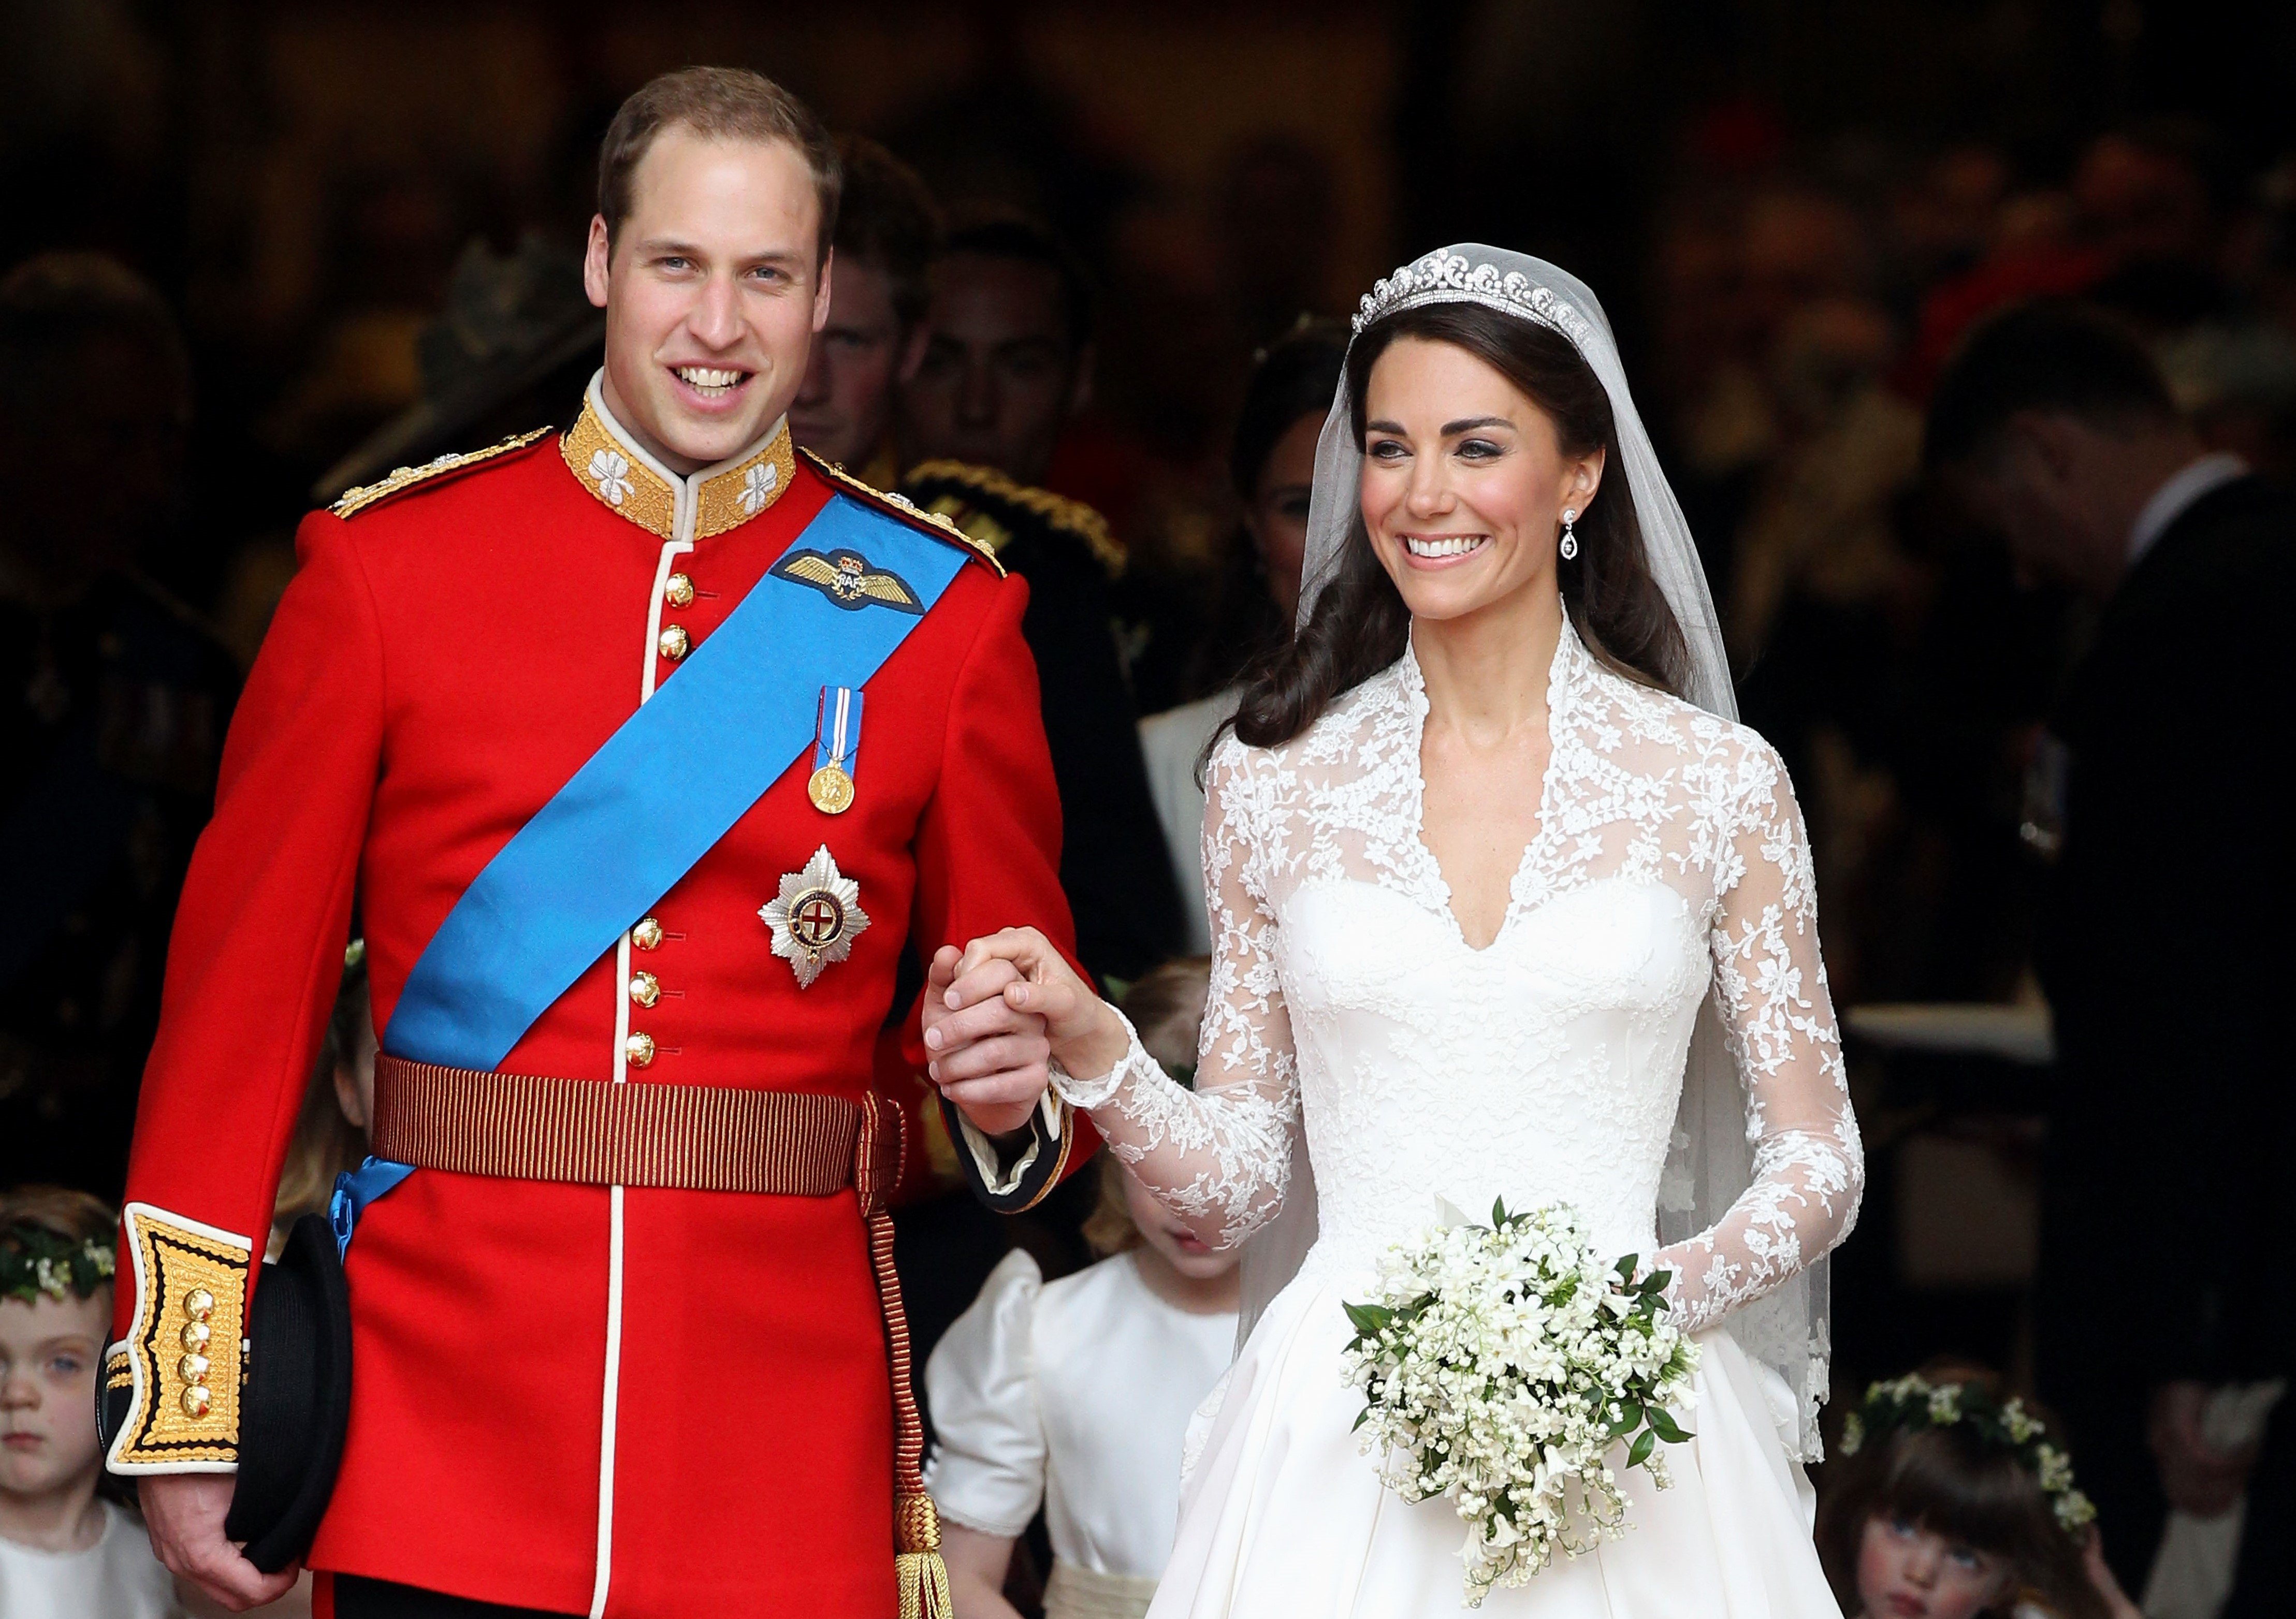 Prince William and Kate Middleton smiling and holding hands following nuptials at Westminster Abbey on April 29, 2011